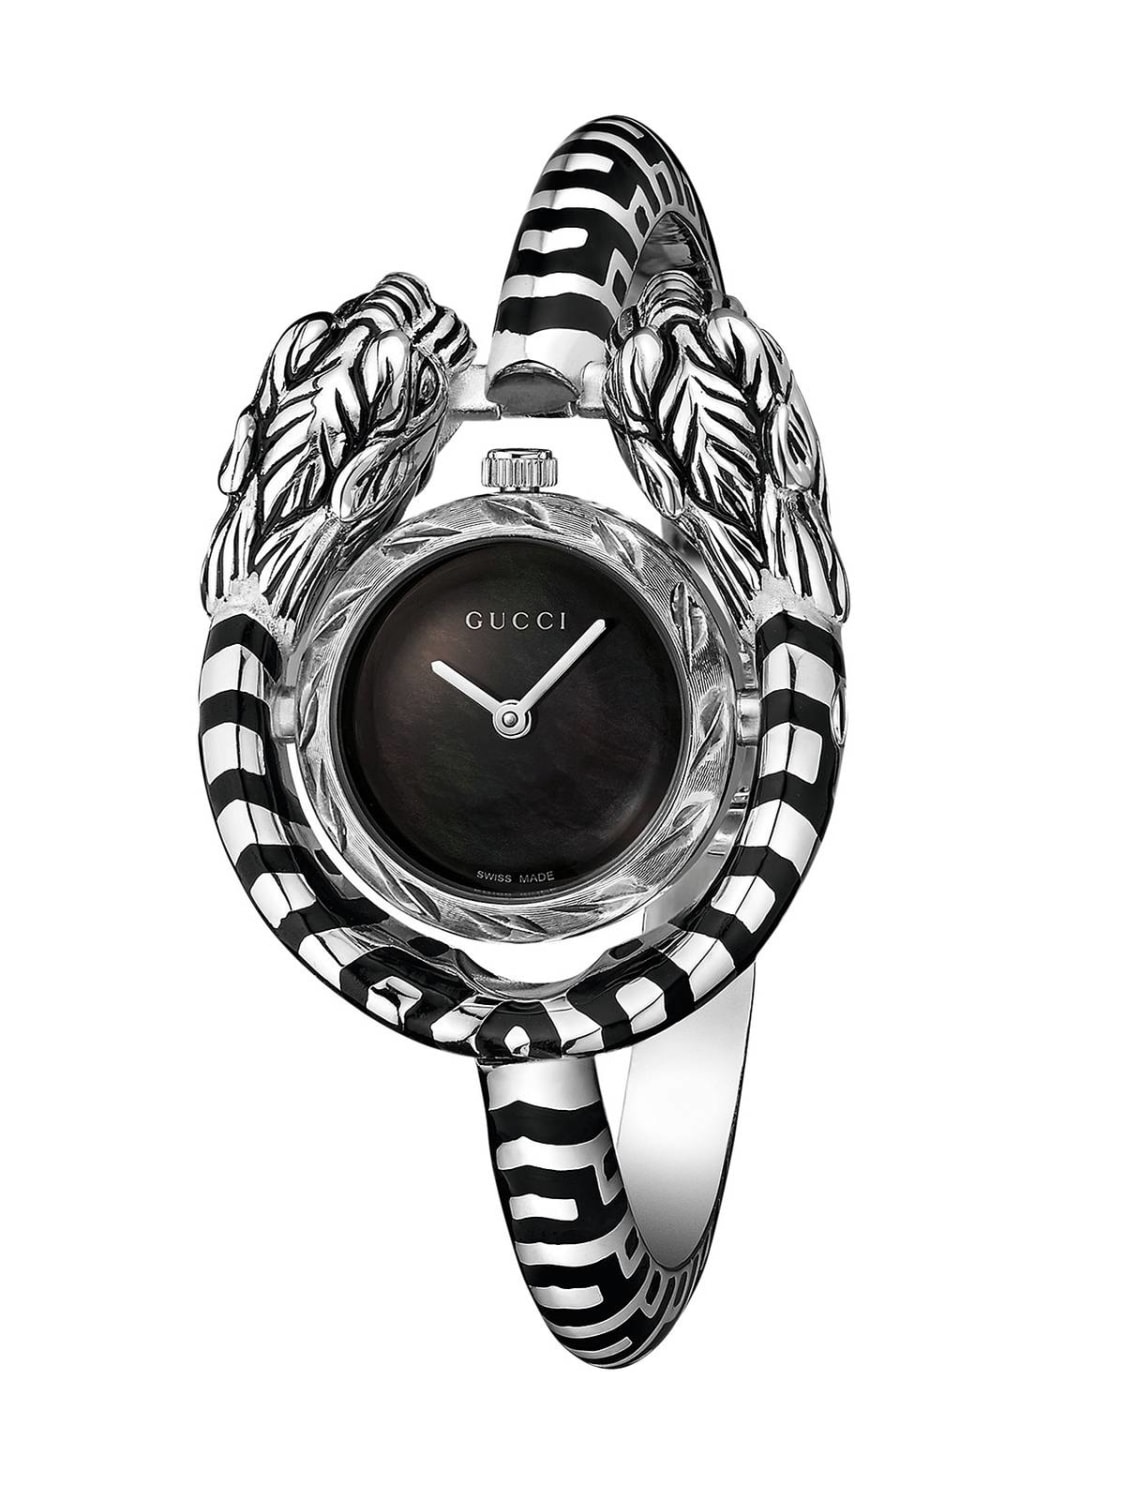 Watch Gucci: Gucci watch for men silver 2